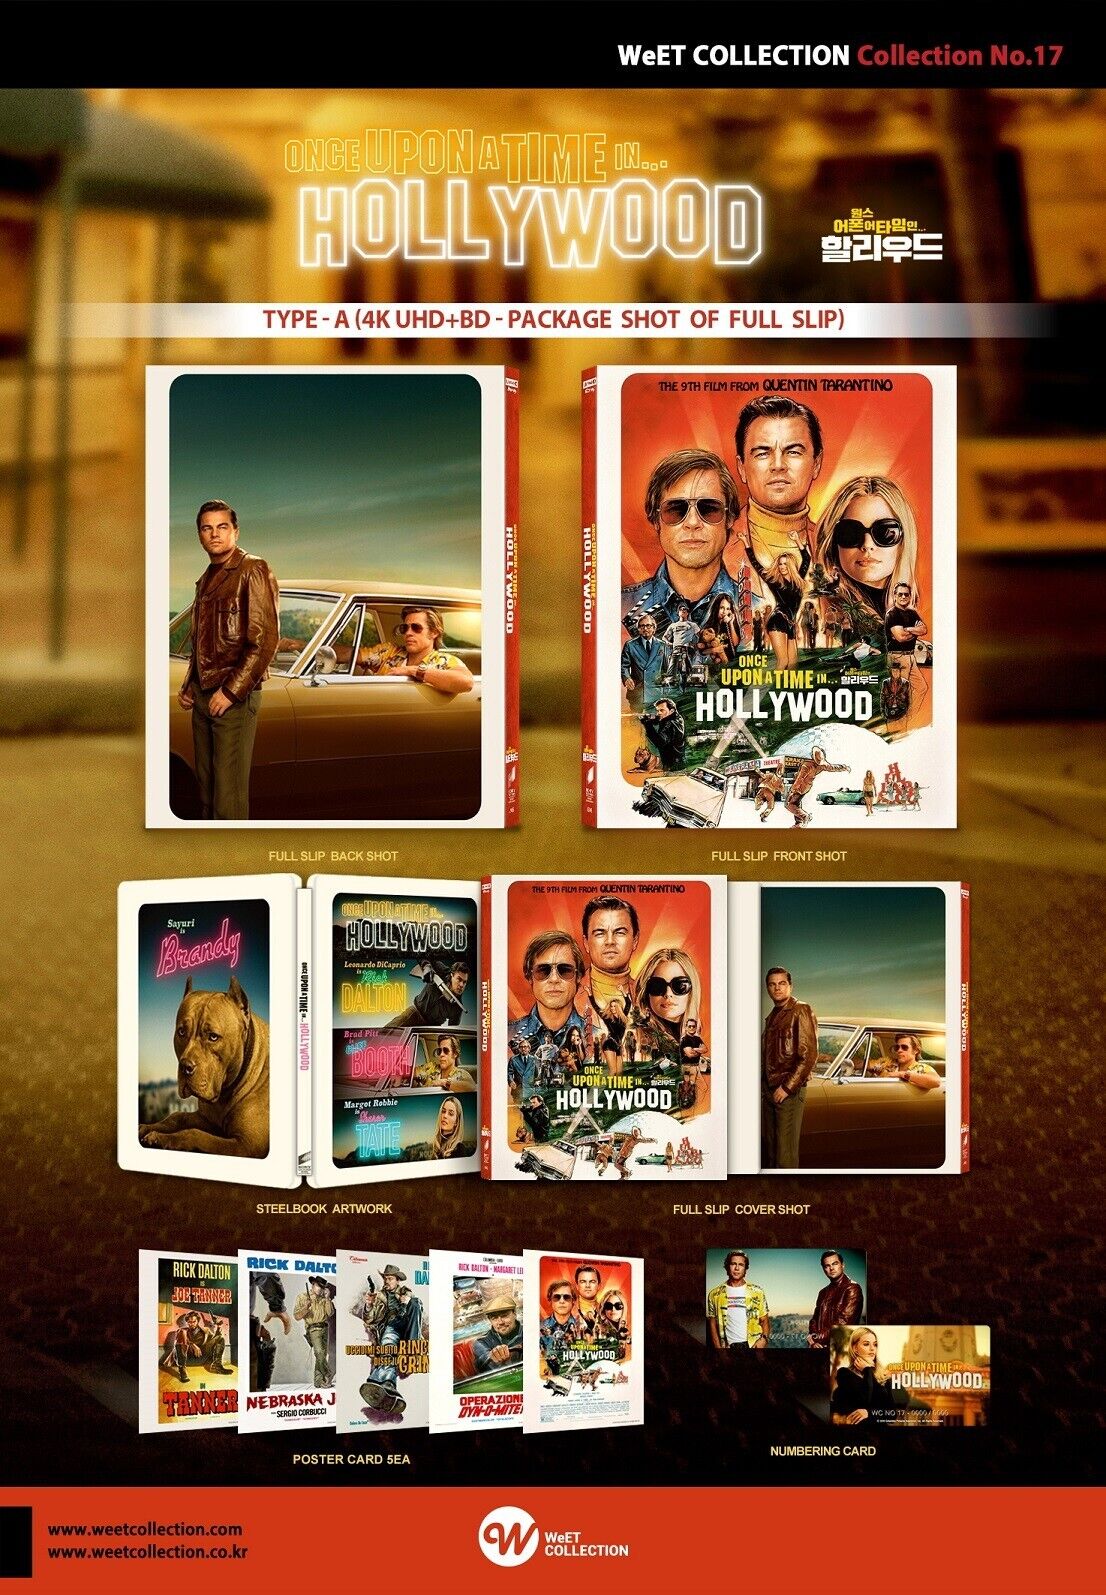 Once Upon A Time In Hollywood 4K+2D Blu-ray Steelbook WeET Collection Collection #17 One Click Set